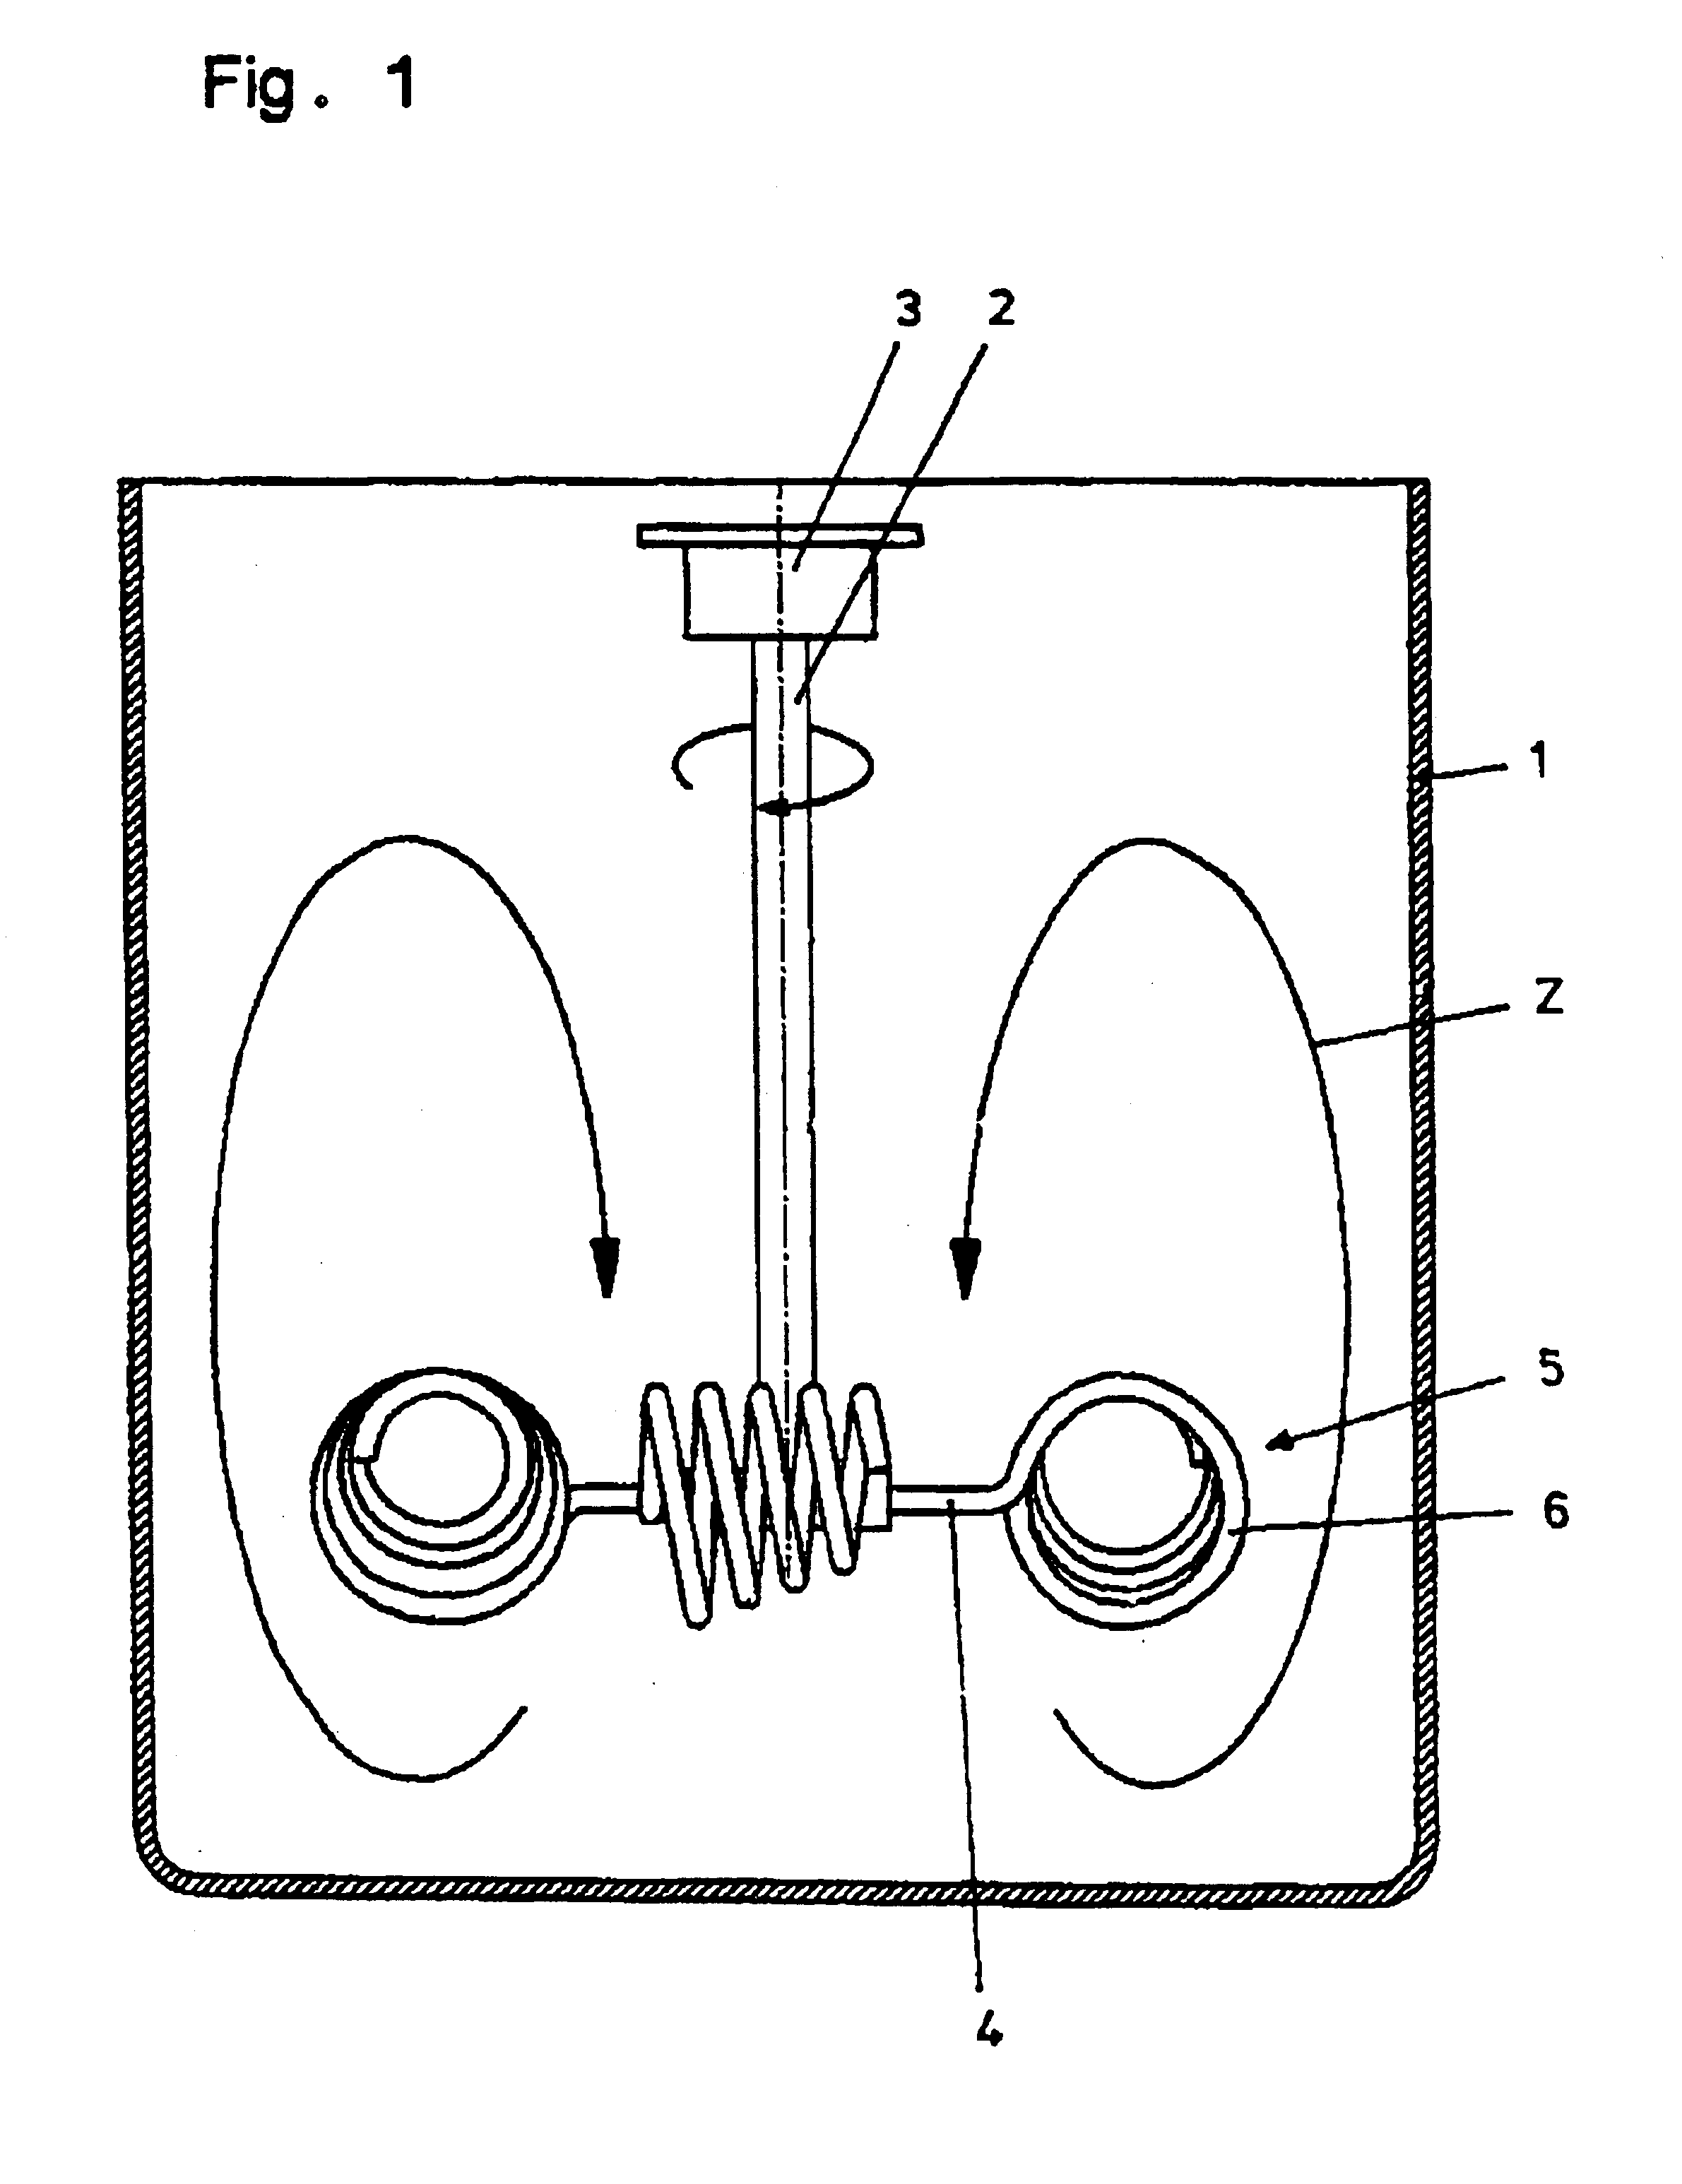 Device for mixing a flowable or pourable medium, especially a highly viscous medium